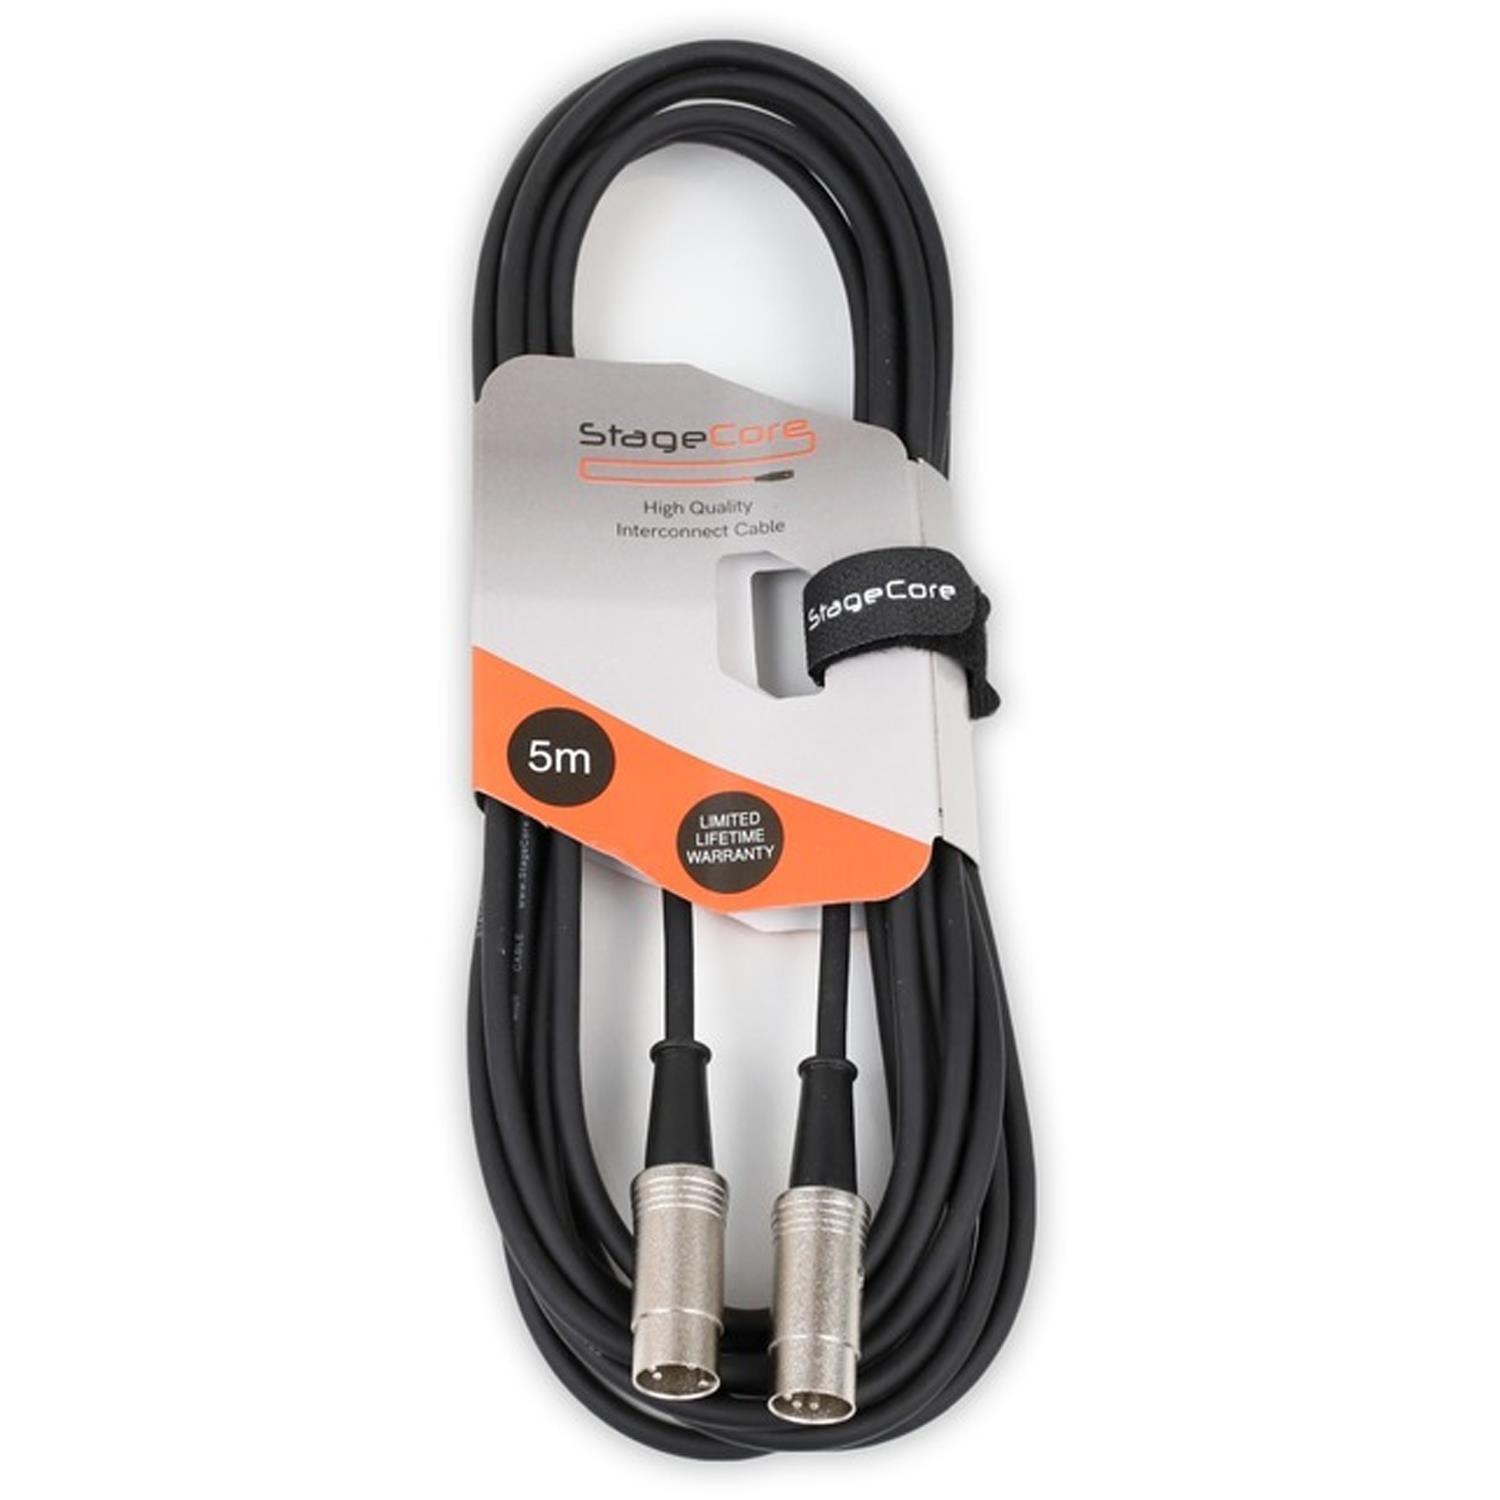 Stagecore 5m 5 Pin DIN to 5 Pin DIN Midi Cable - DY Pro Audio